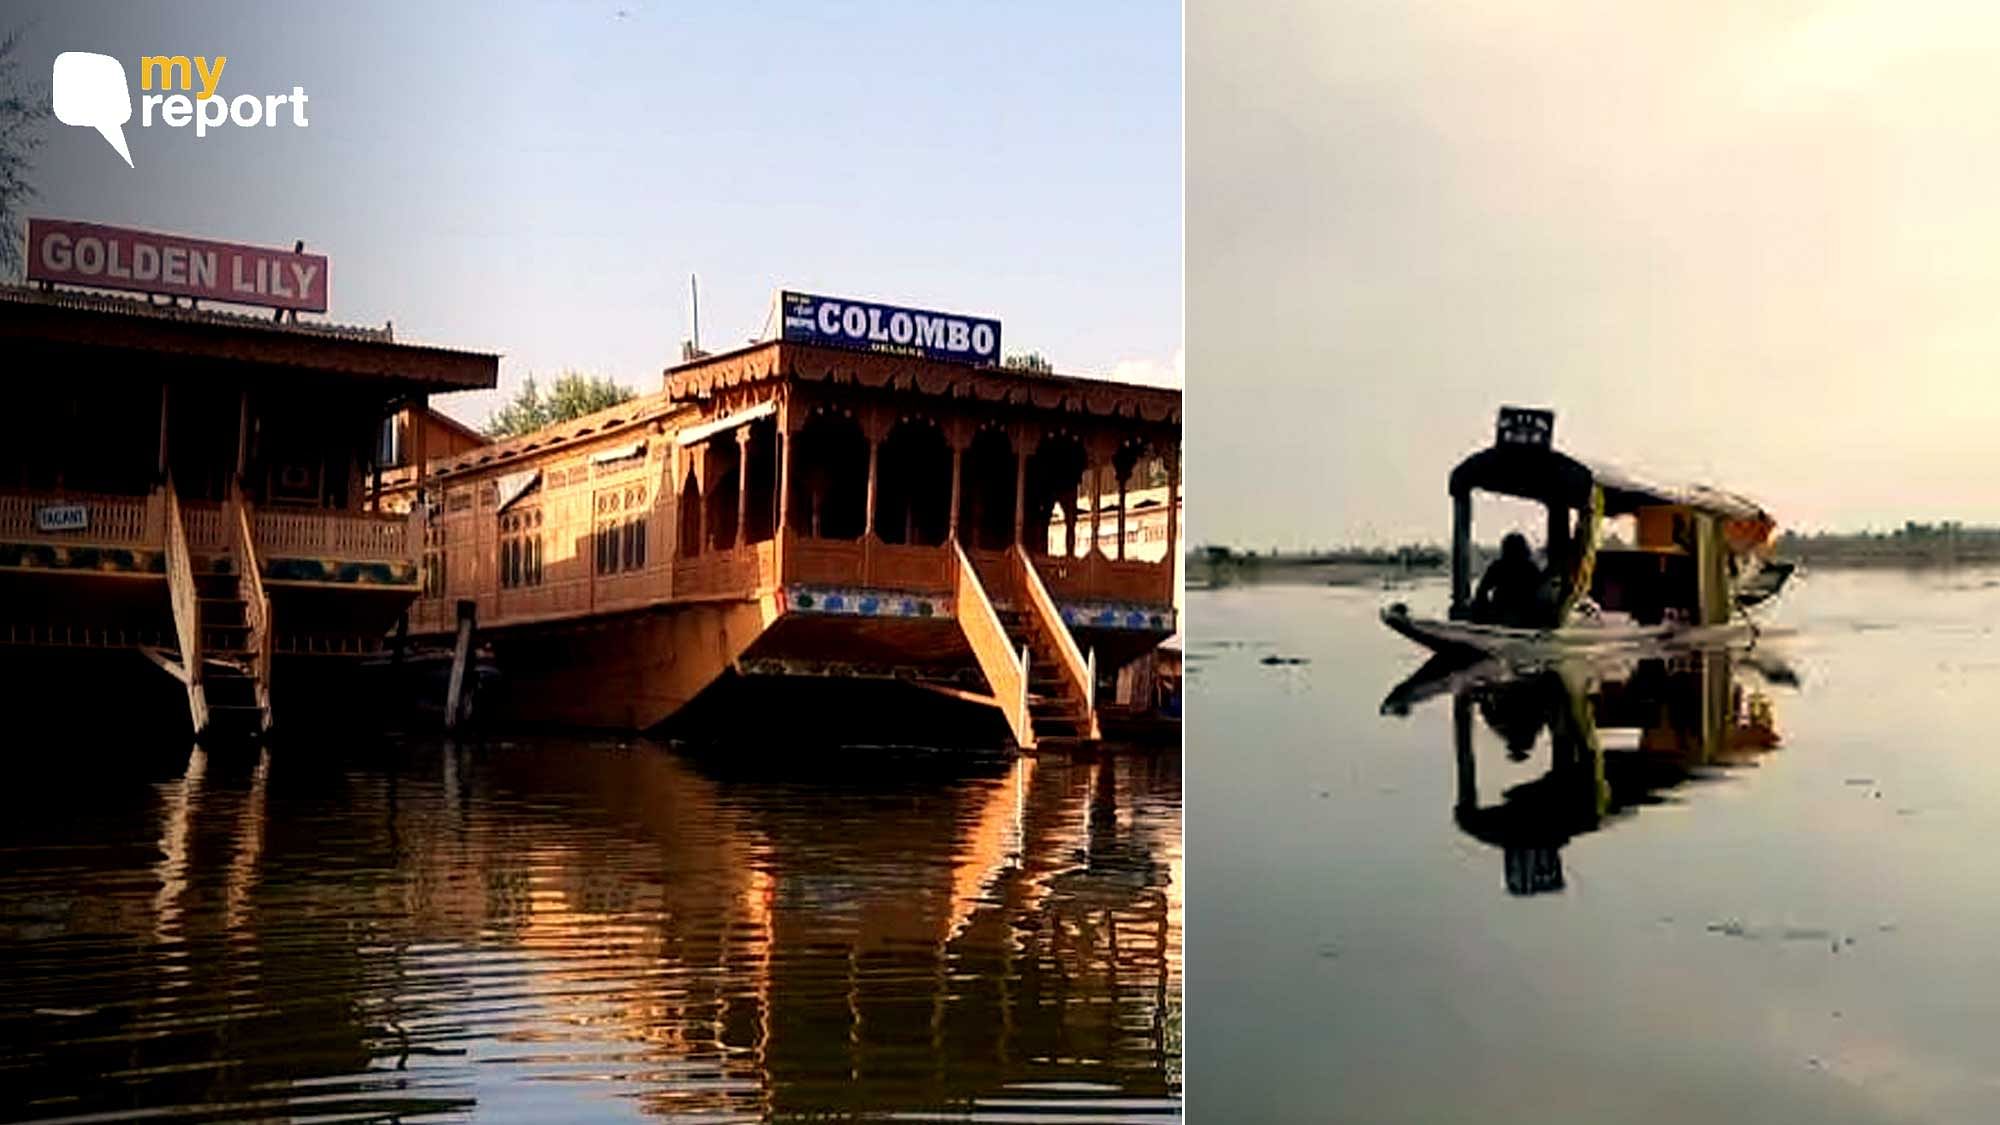 <div class="paragraphs"><p>For 3 years in a row, Kashmir has seen miserably low tourist count, making difficult for houseboats to stay afloat.</p></div>